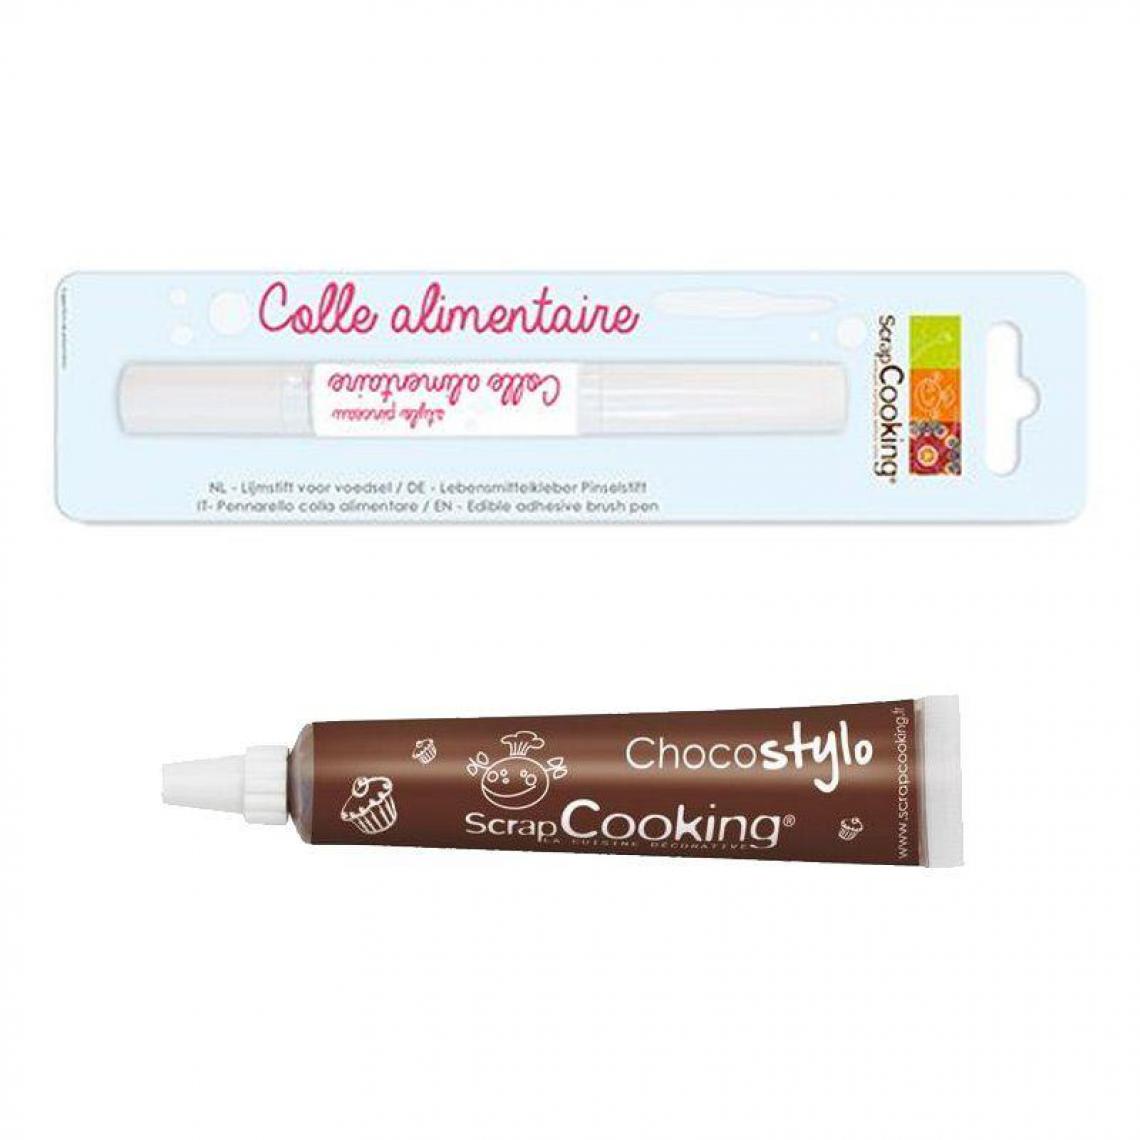 Scrapcooking - Stylo chocolat + Stylo pinceau colle alimentaire - Kits créatifs